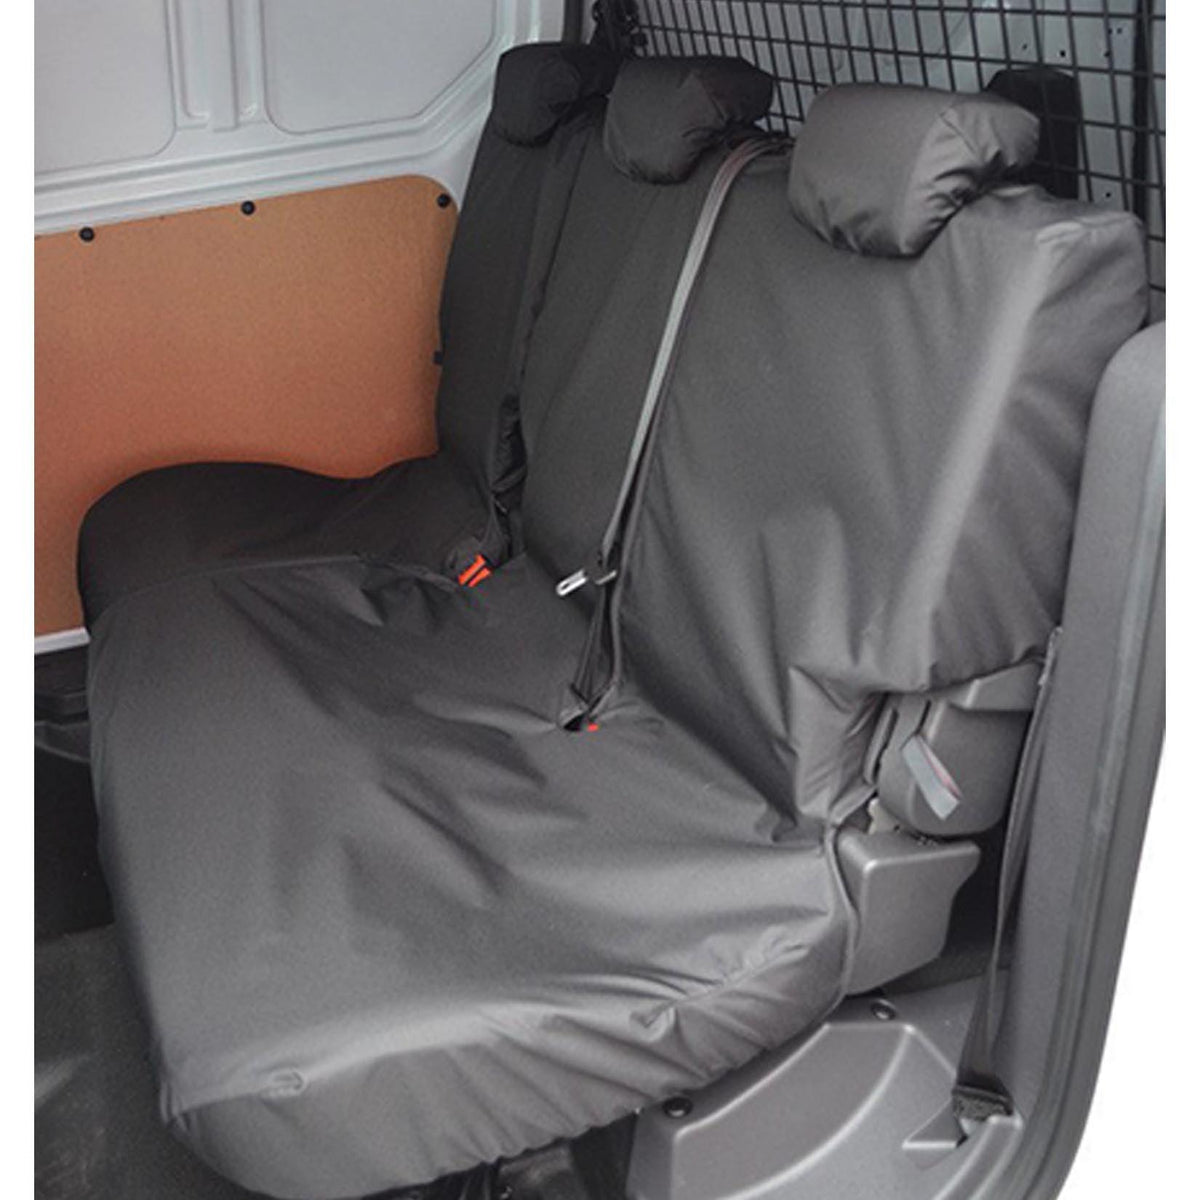 FORD TRANSIT CONNECT VAN 2014-2018 DOUBLE CAB IN VAN REAR SEAT COVERS - BLACK - Storm Xccessories2